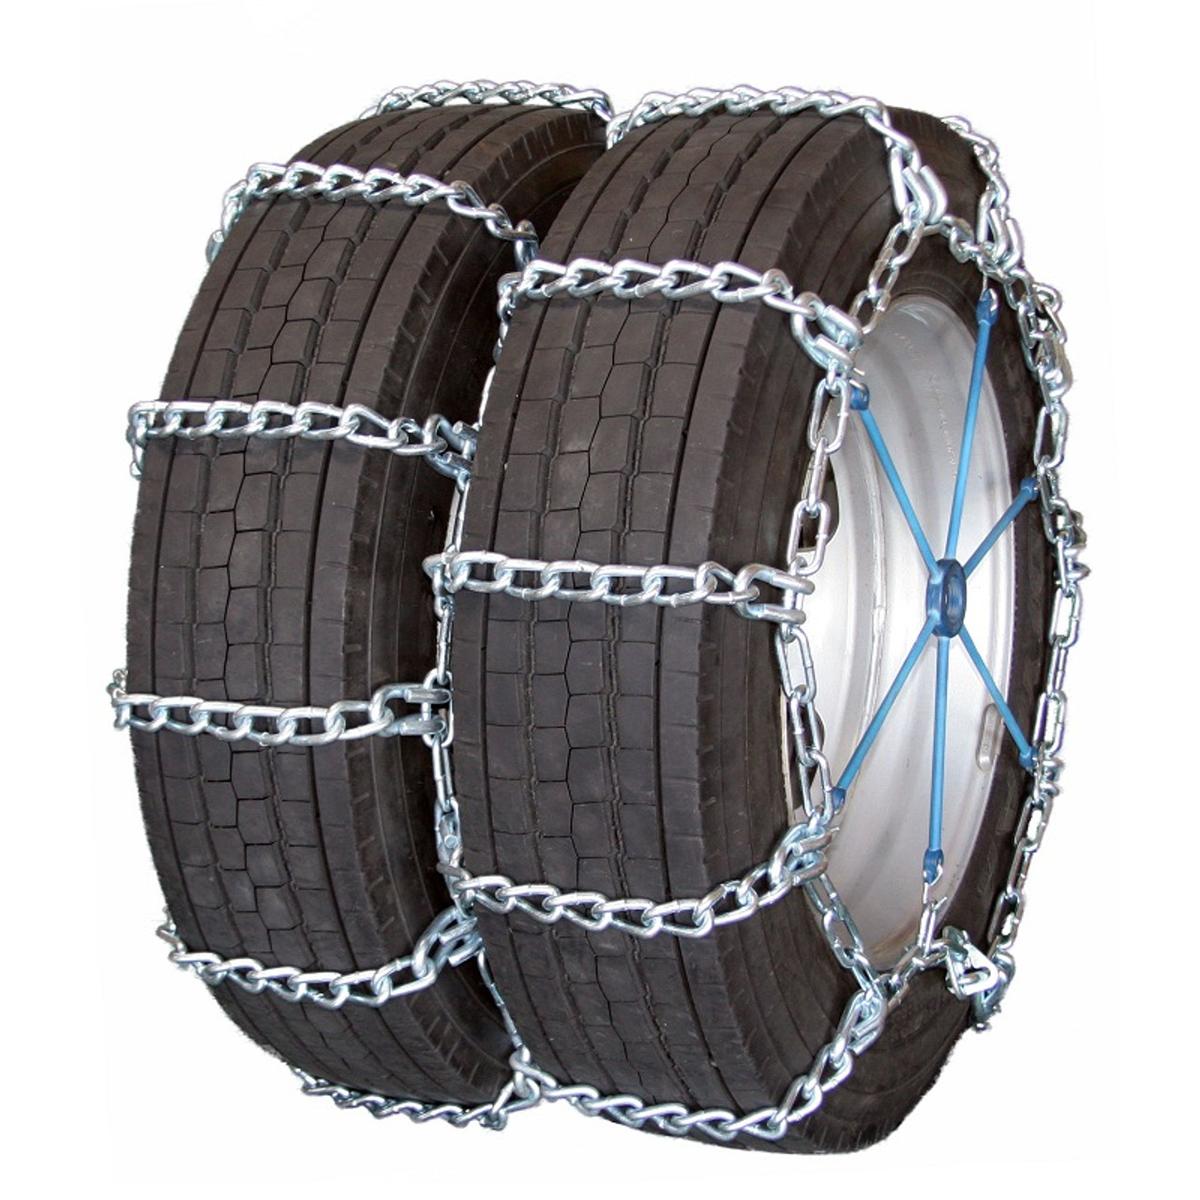 Mud Service Dual 245/85-15 Truck Tire Chains